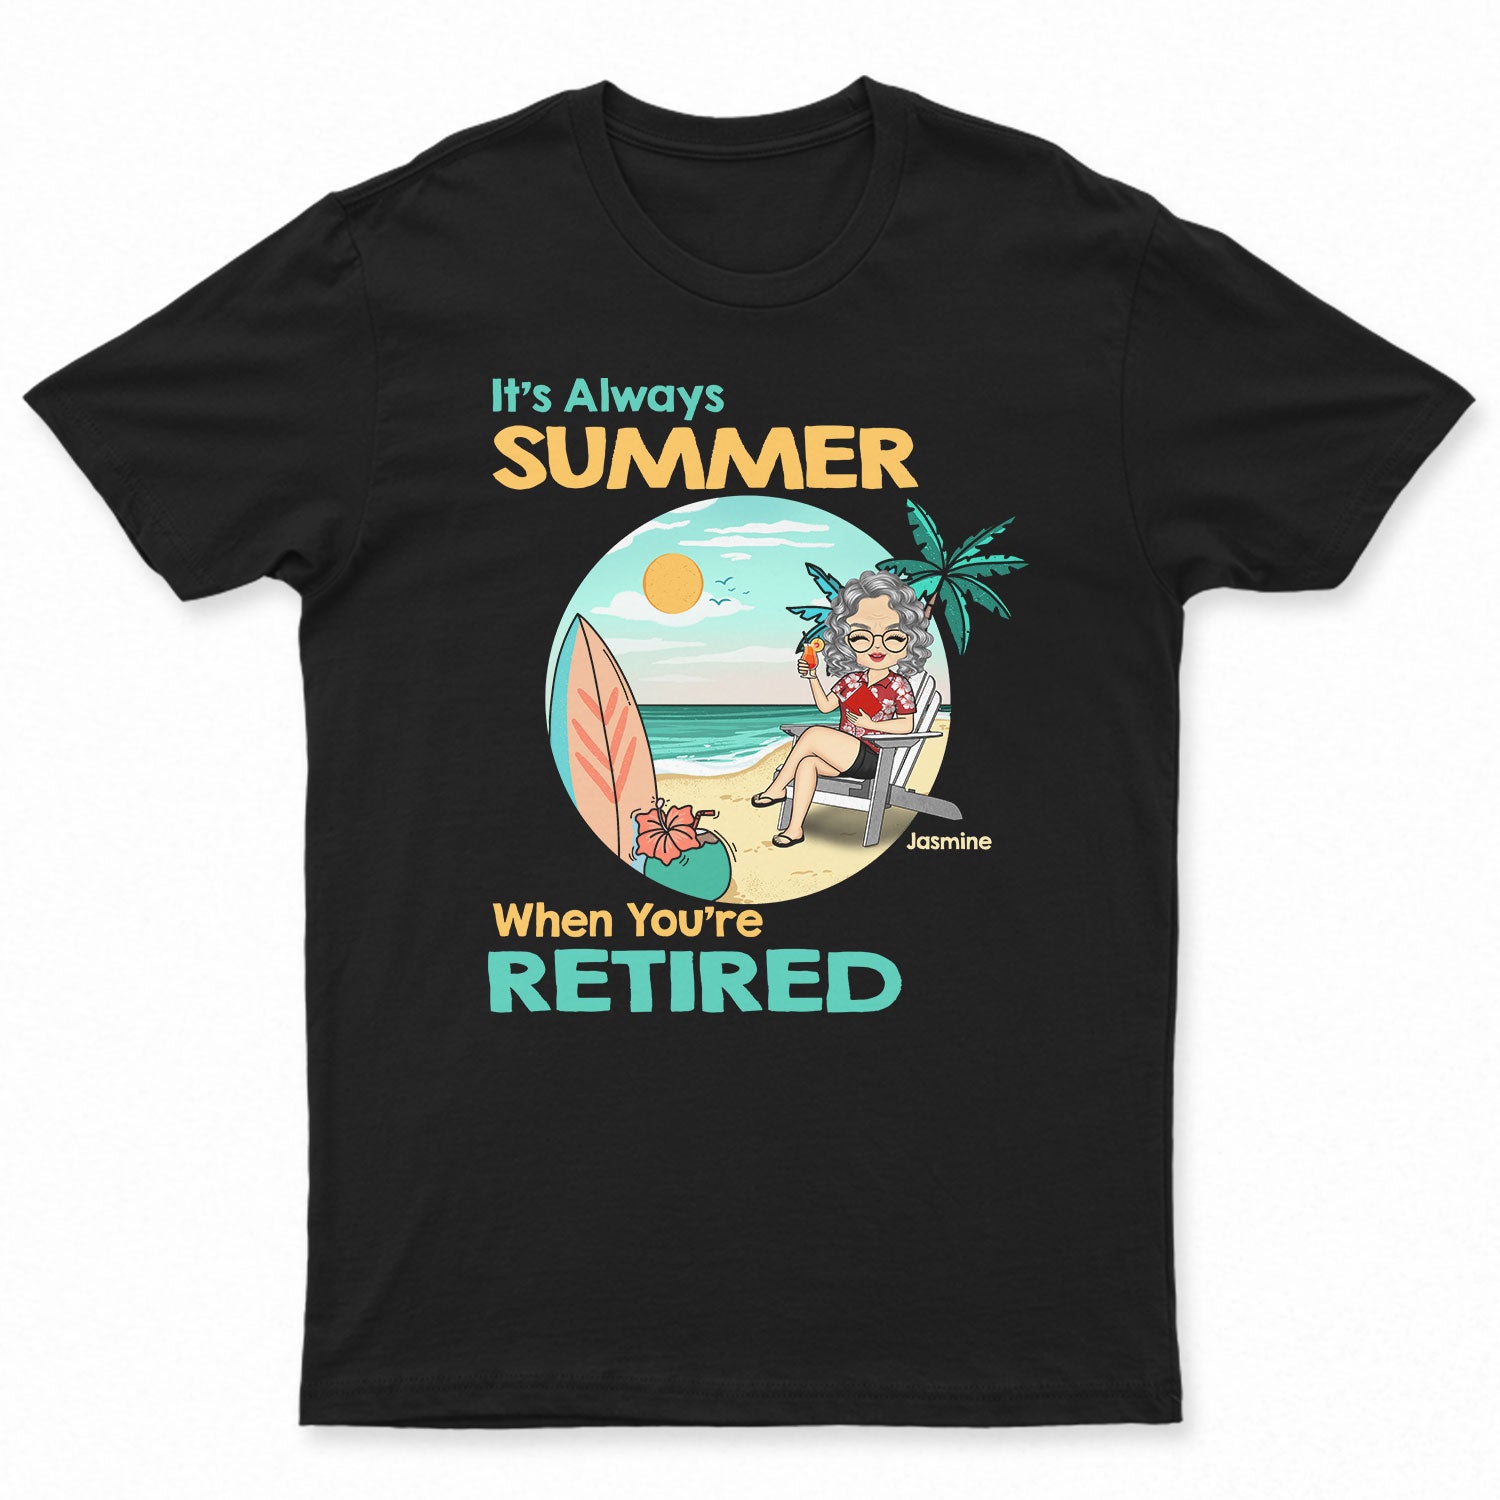 It's Always Summer Vacation Retired - Personalized Custom T Shirt